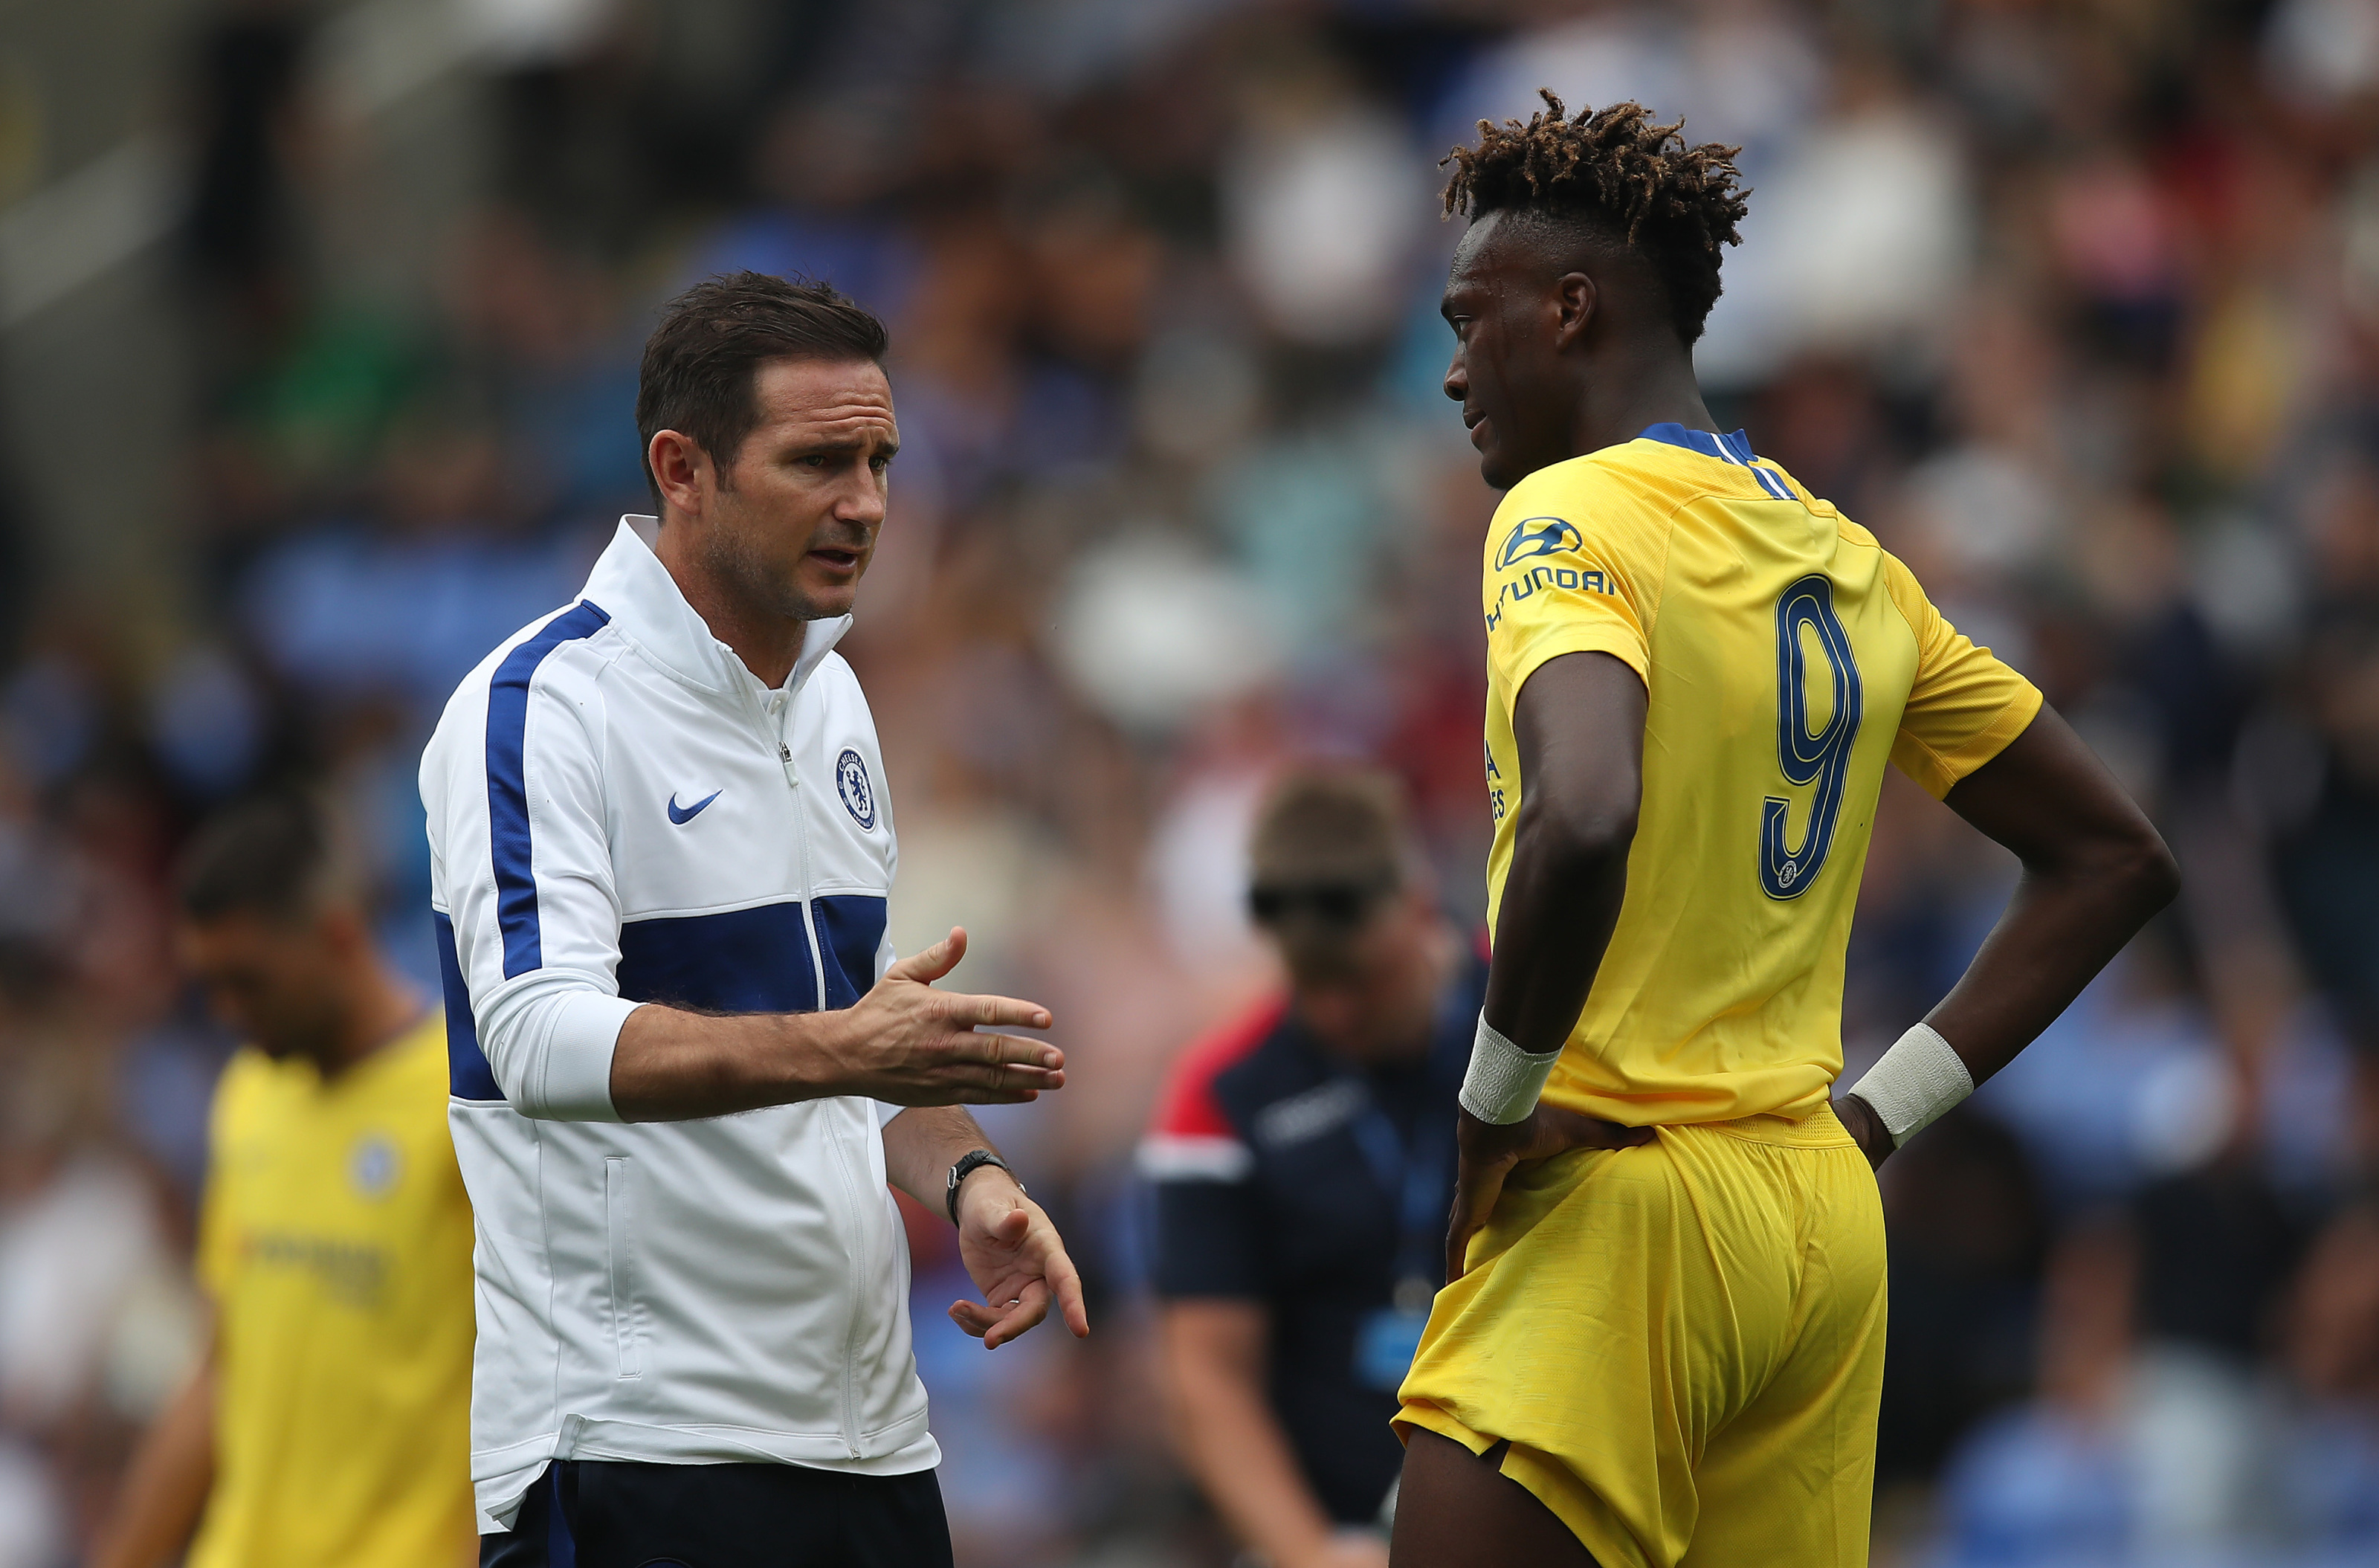 Chelsea's Tammy Abraham says he can score goals for Champions